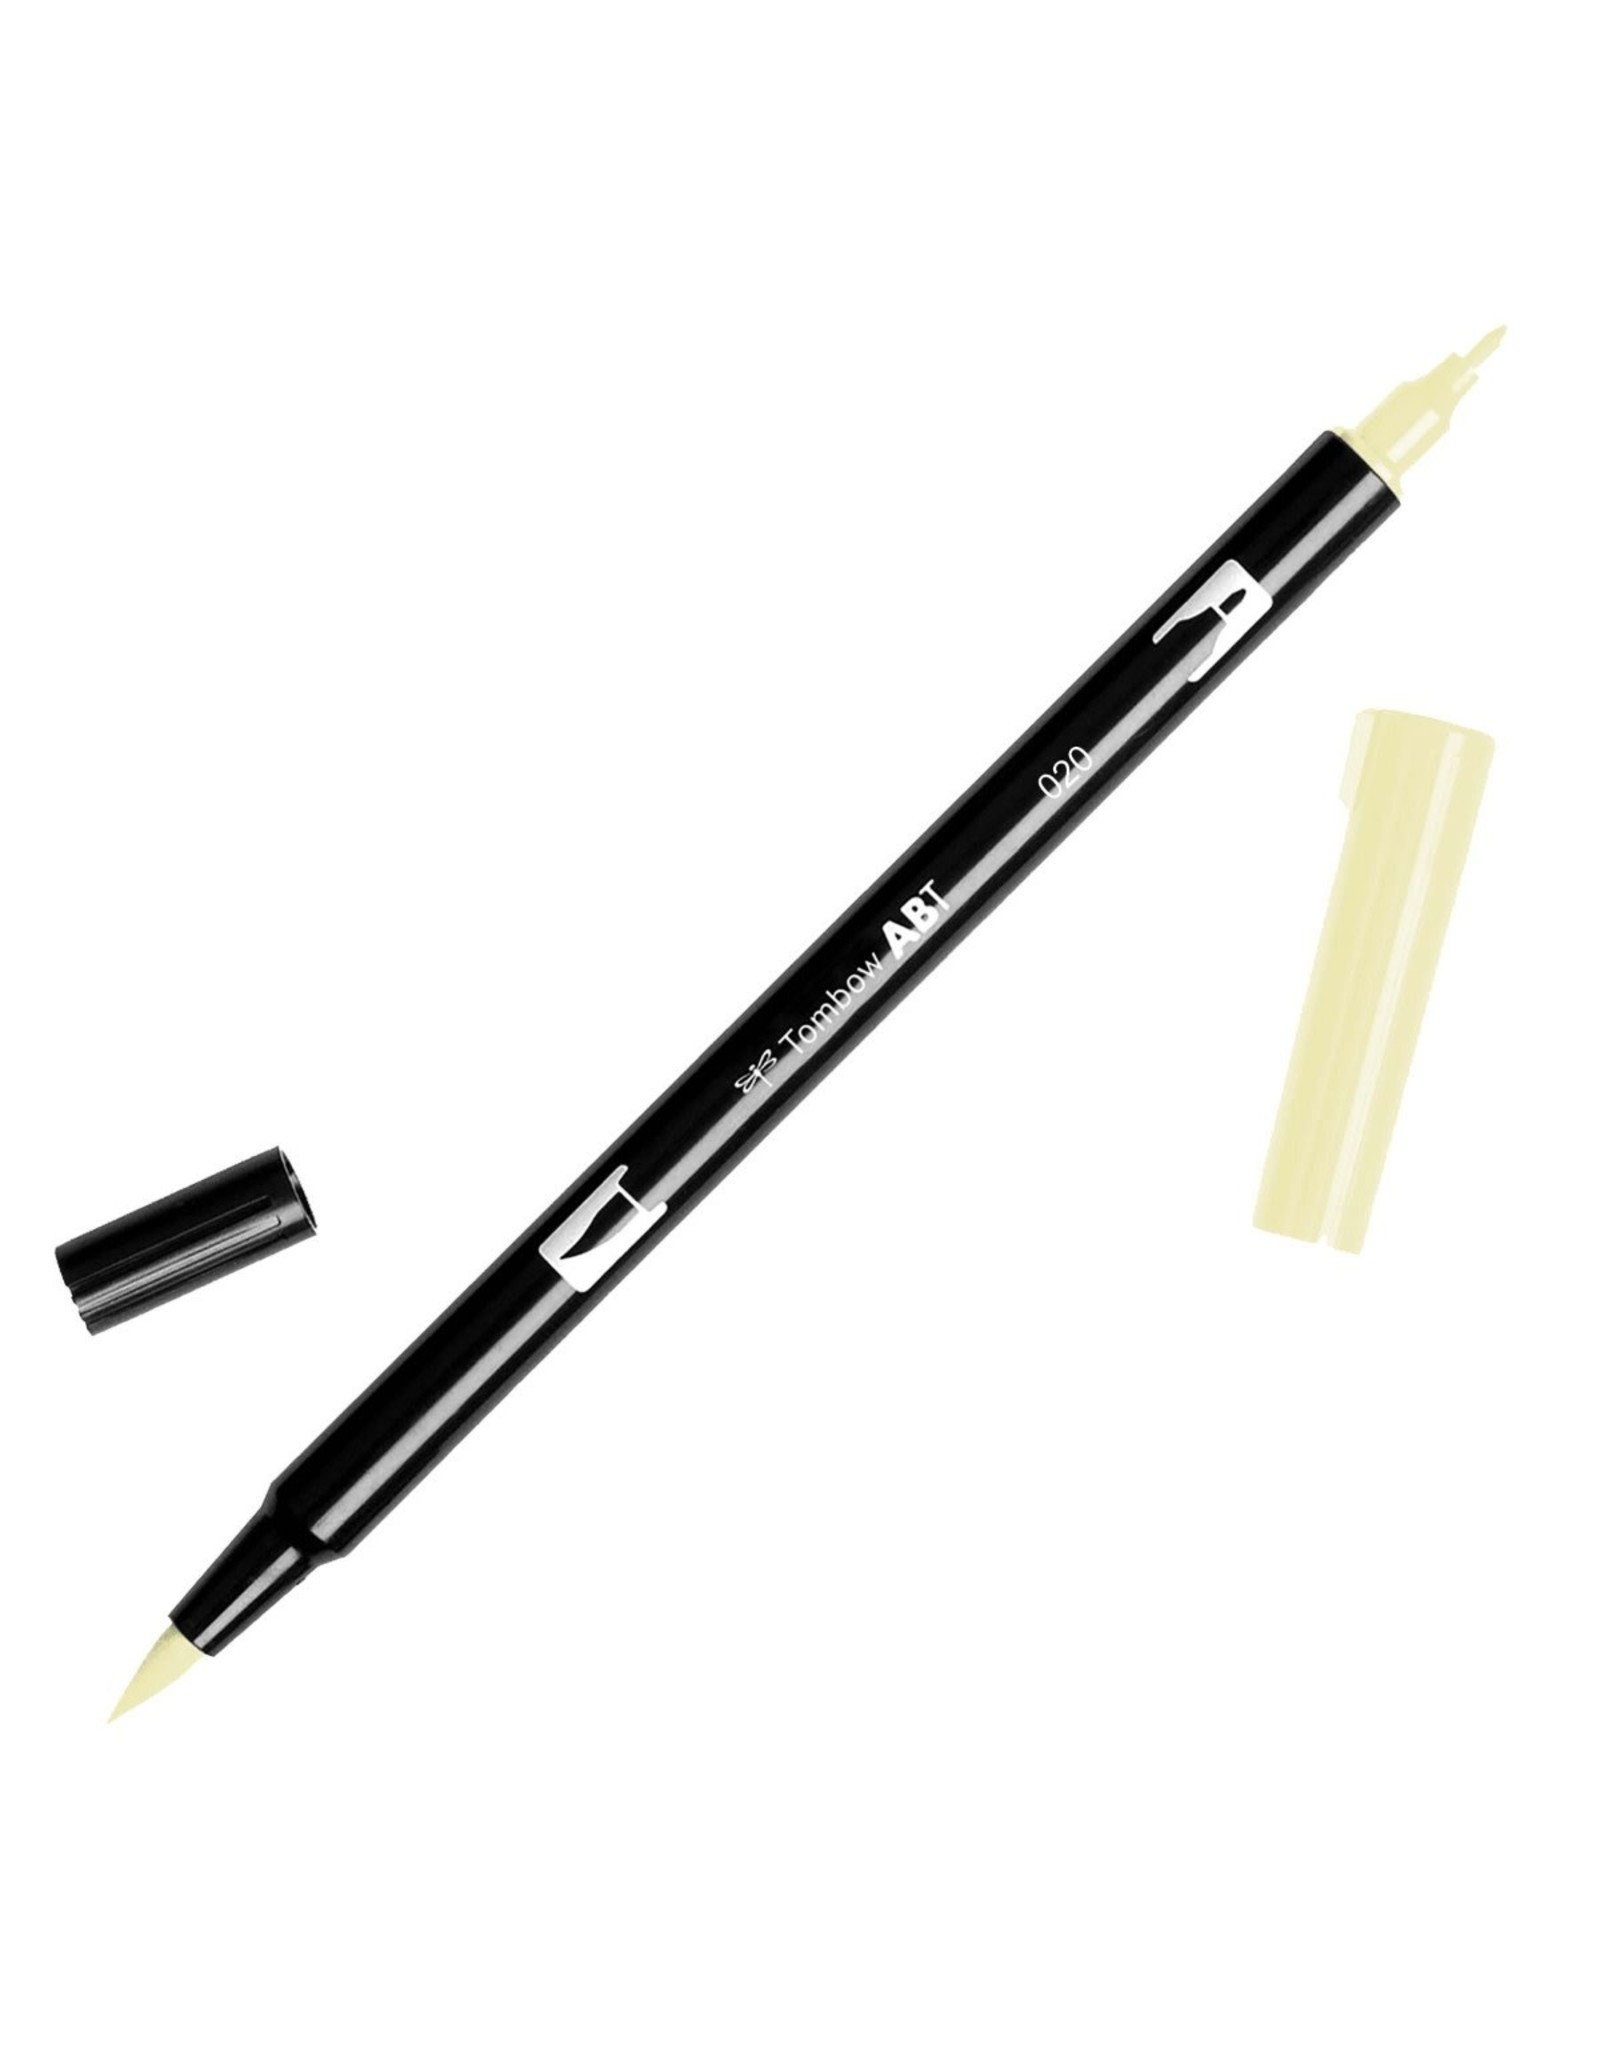 TOMBOW TOMBOW ABT-020 PEACH DUAL BRUSH MARKER